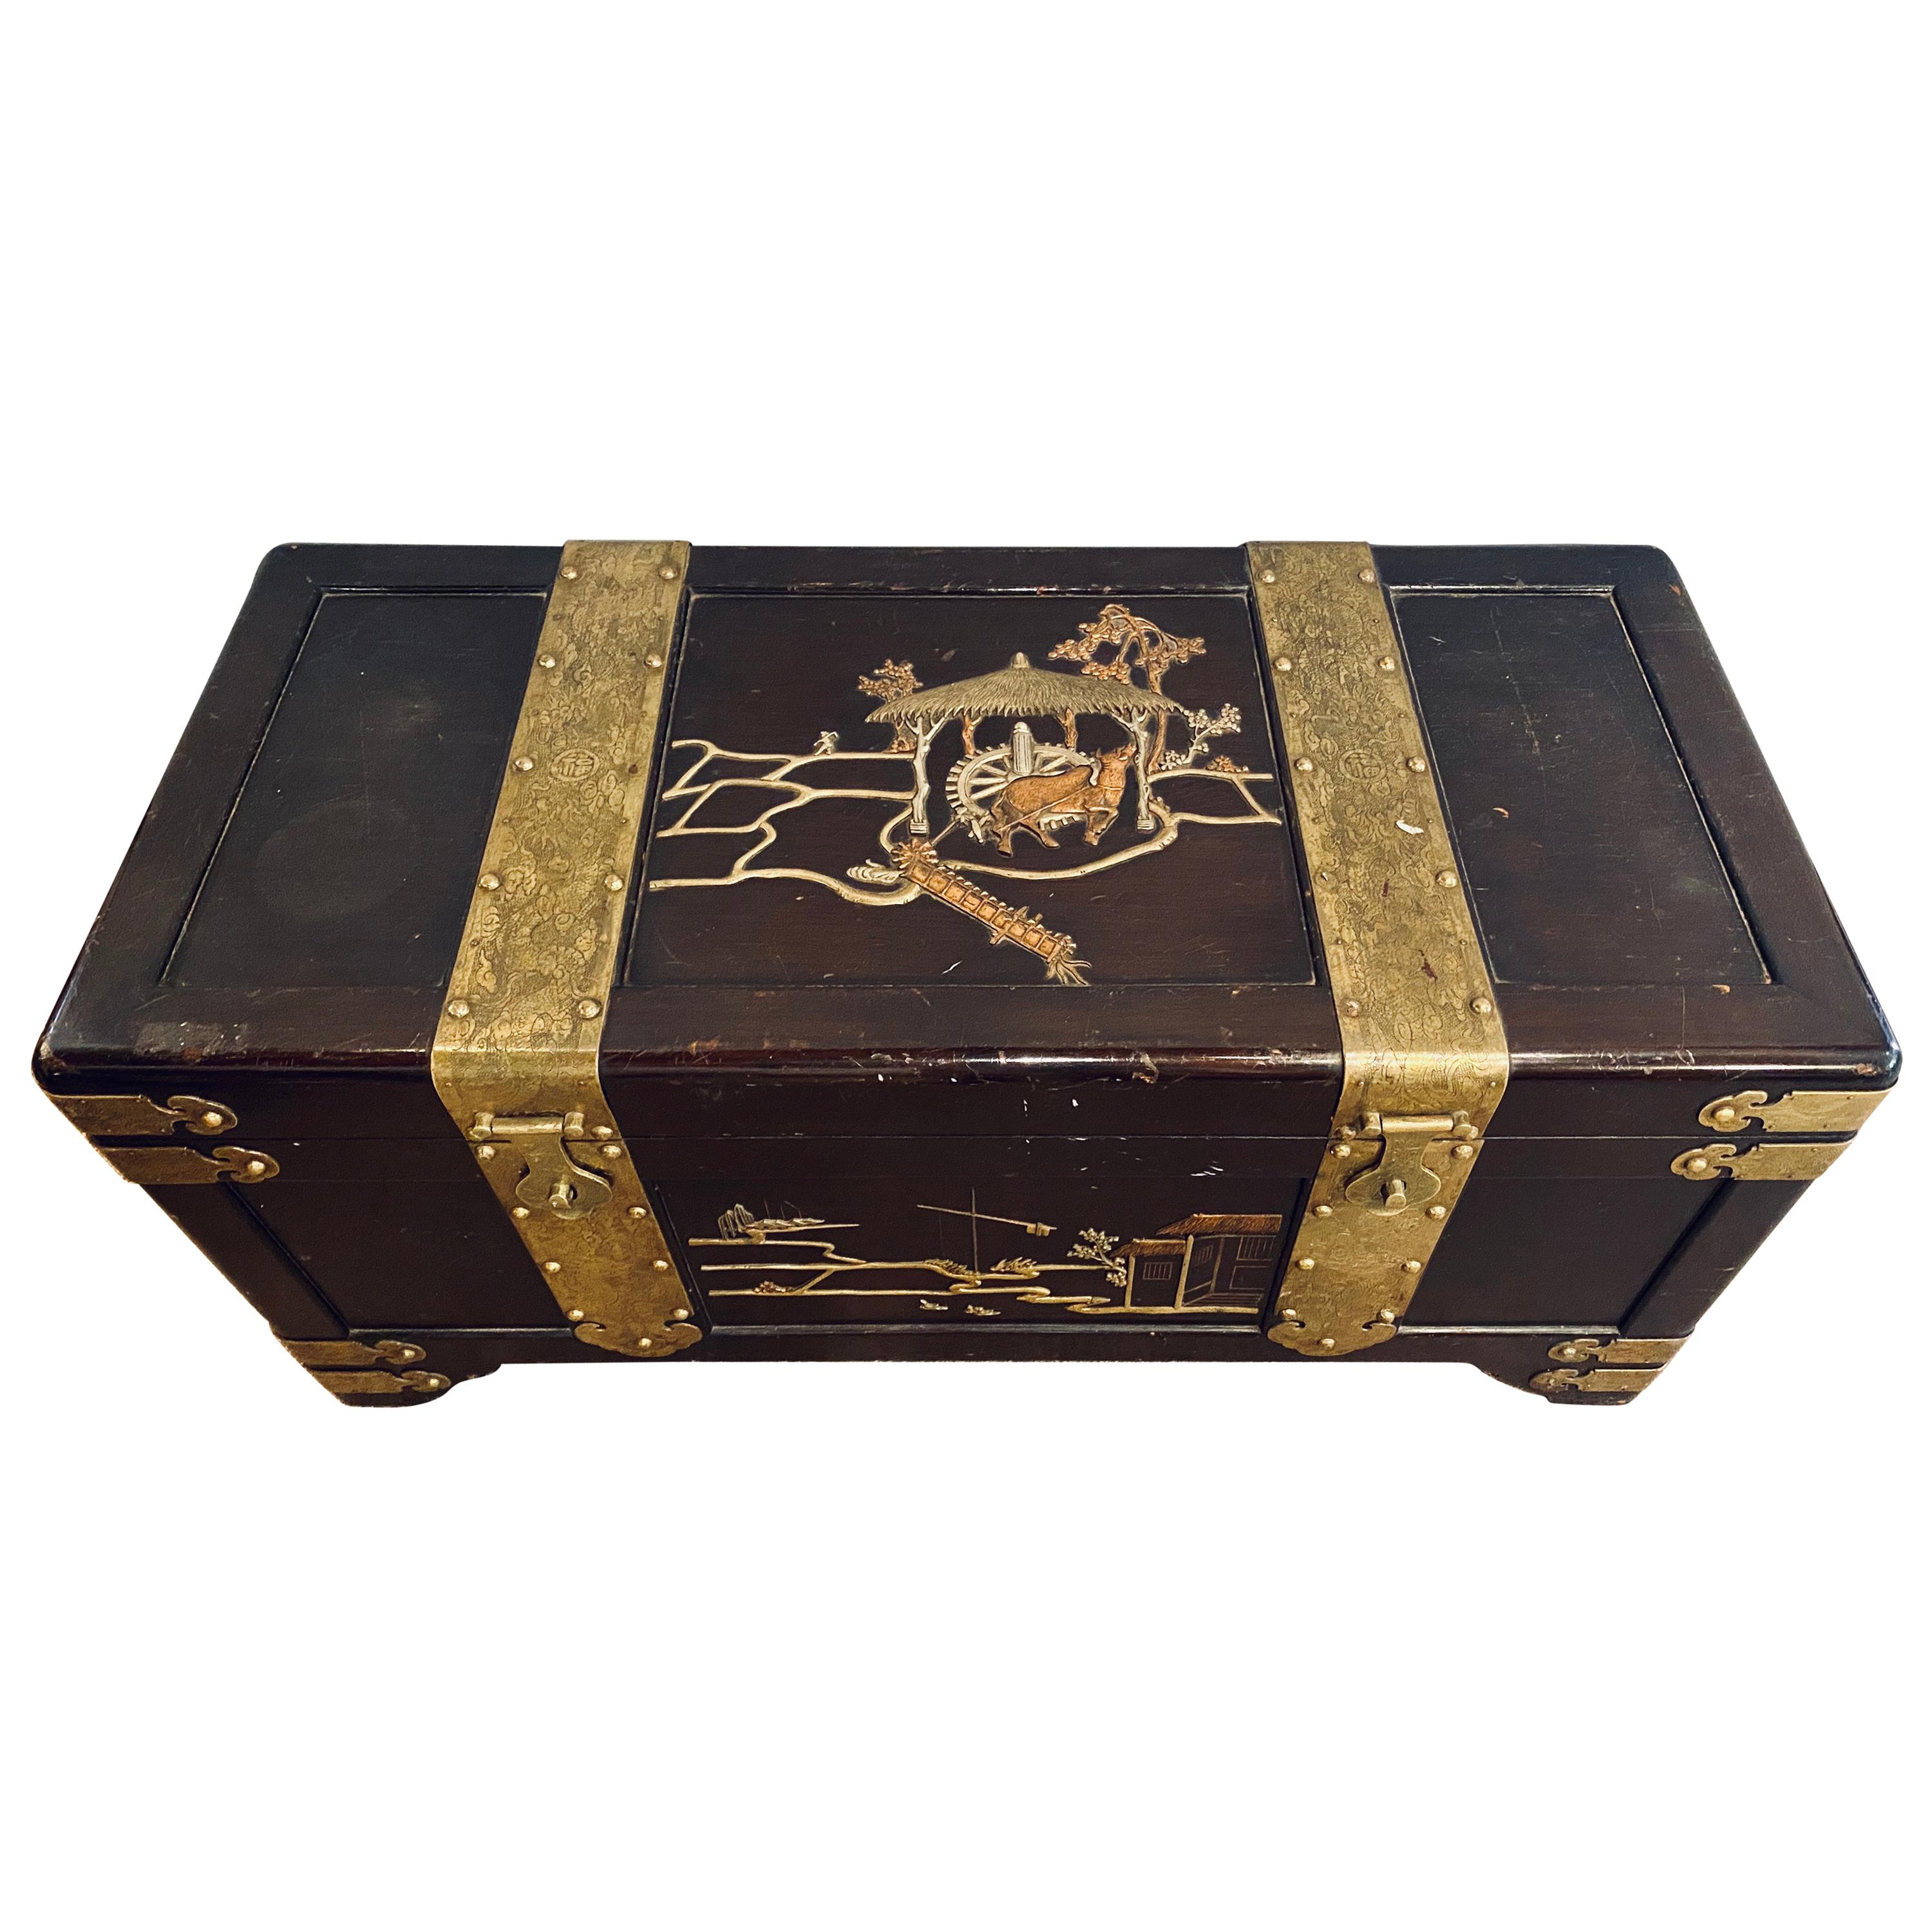 1920s Asian Dowry, Blanket or Storage Chest, Bronze Decorated J. L. George